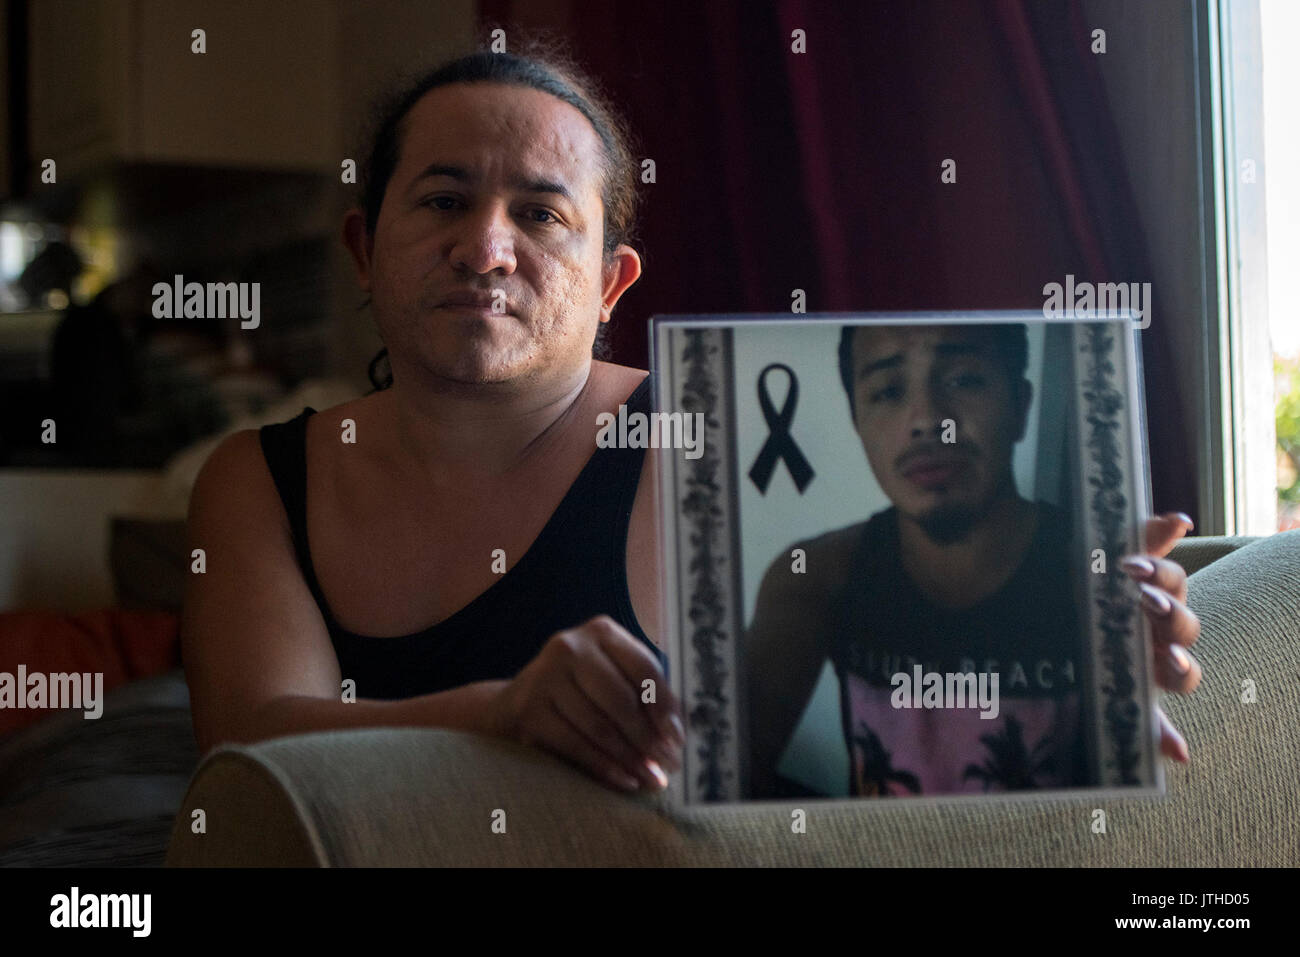 West Palm Beach, Florida, USA. 9th Aug, 2017. Pedro Cruz, 36, poses for a portrait holding a photograph of his late cousin, 22-year-old Juan Cruz, at his aunt's home in Boynton Beach, Fla., on Wednesday, August 9, 2017. Juan was killed August 6 defending Pedro during an altercation outside a Lake Worth restaurant. Credit: Andres Leiva/The Palm Beach Post/ZUMA Wire/Alamy Live News Stock Photo